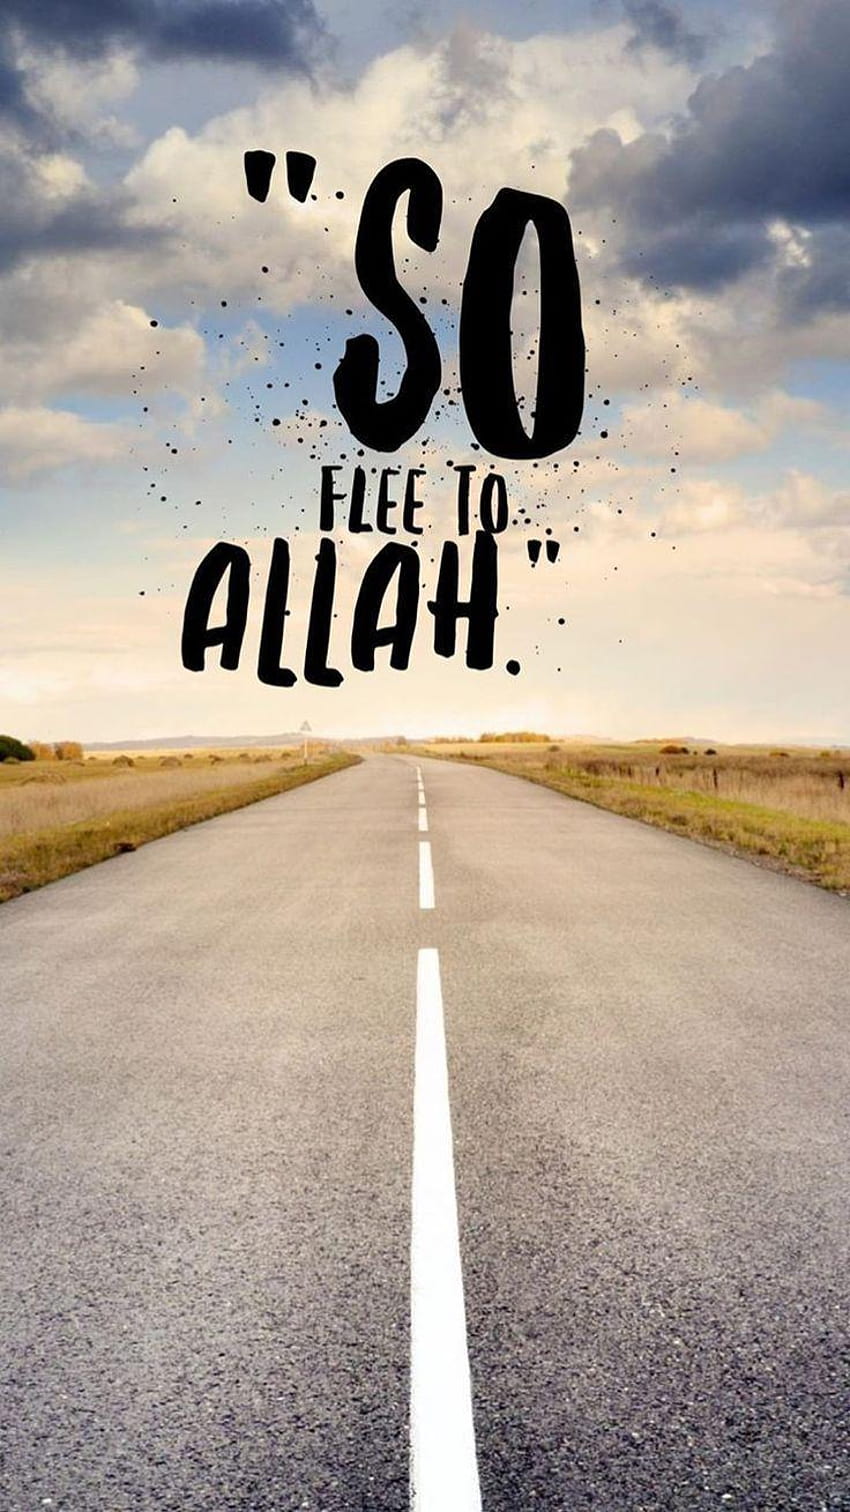 Islamic quotes iphone HD wallpapers | Pxfuel